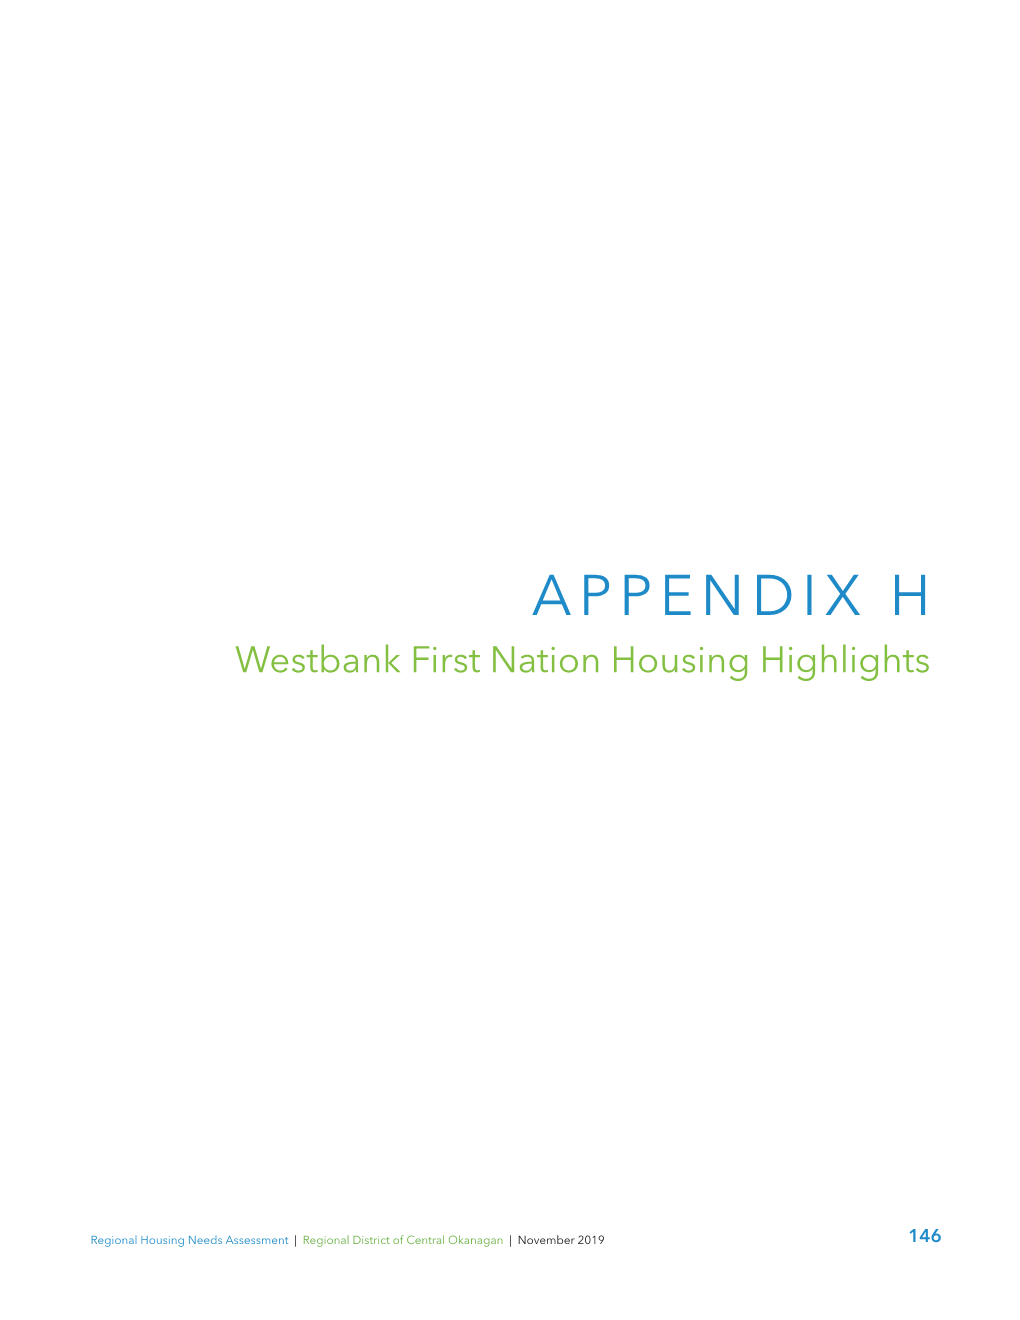 Appendix H: Westbank First Nation Housing Highlights